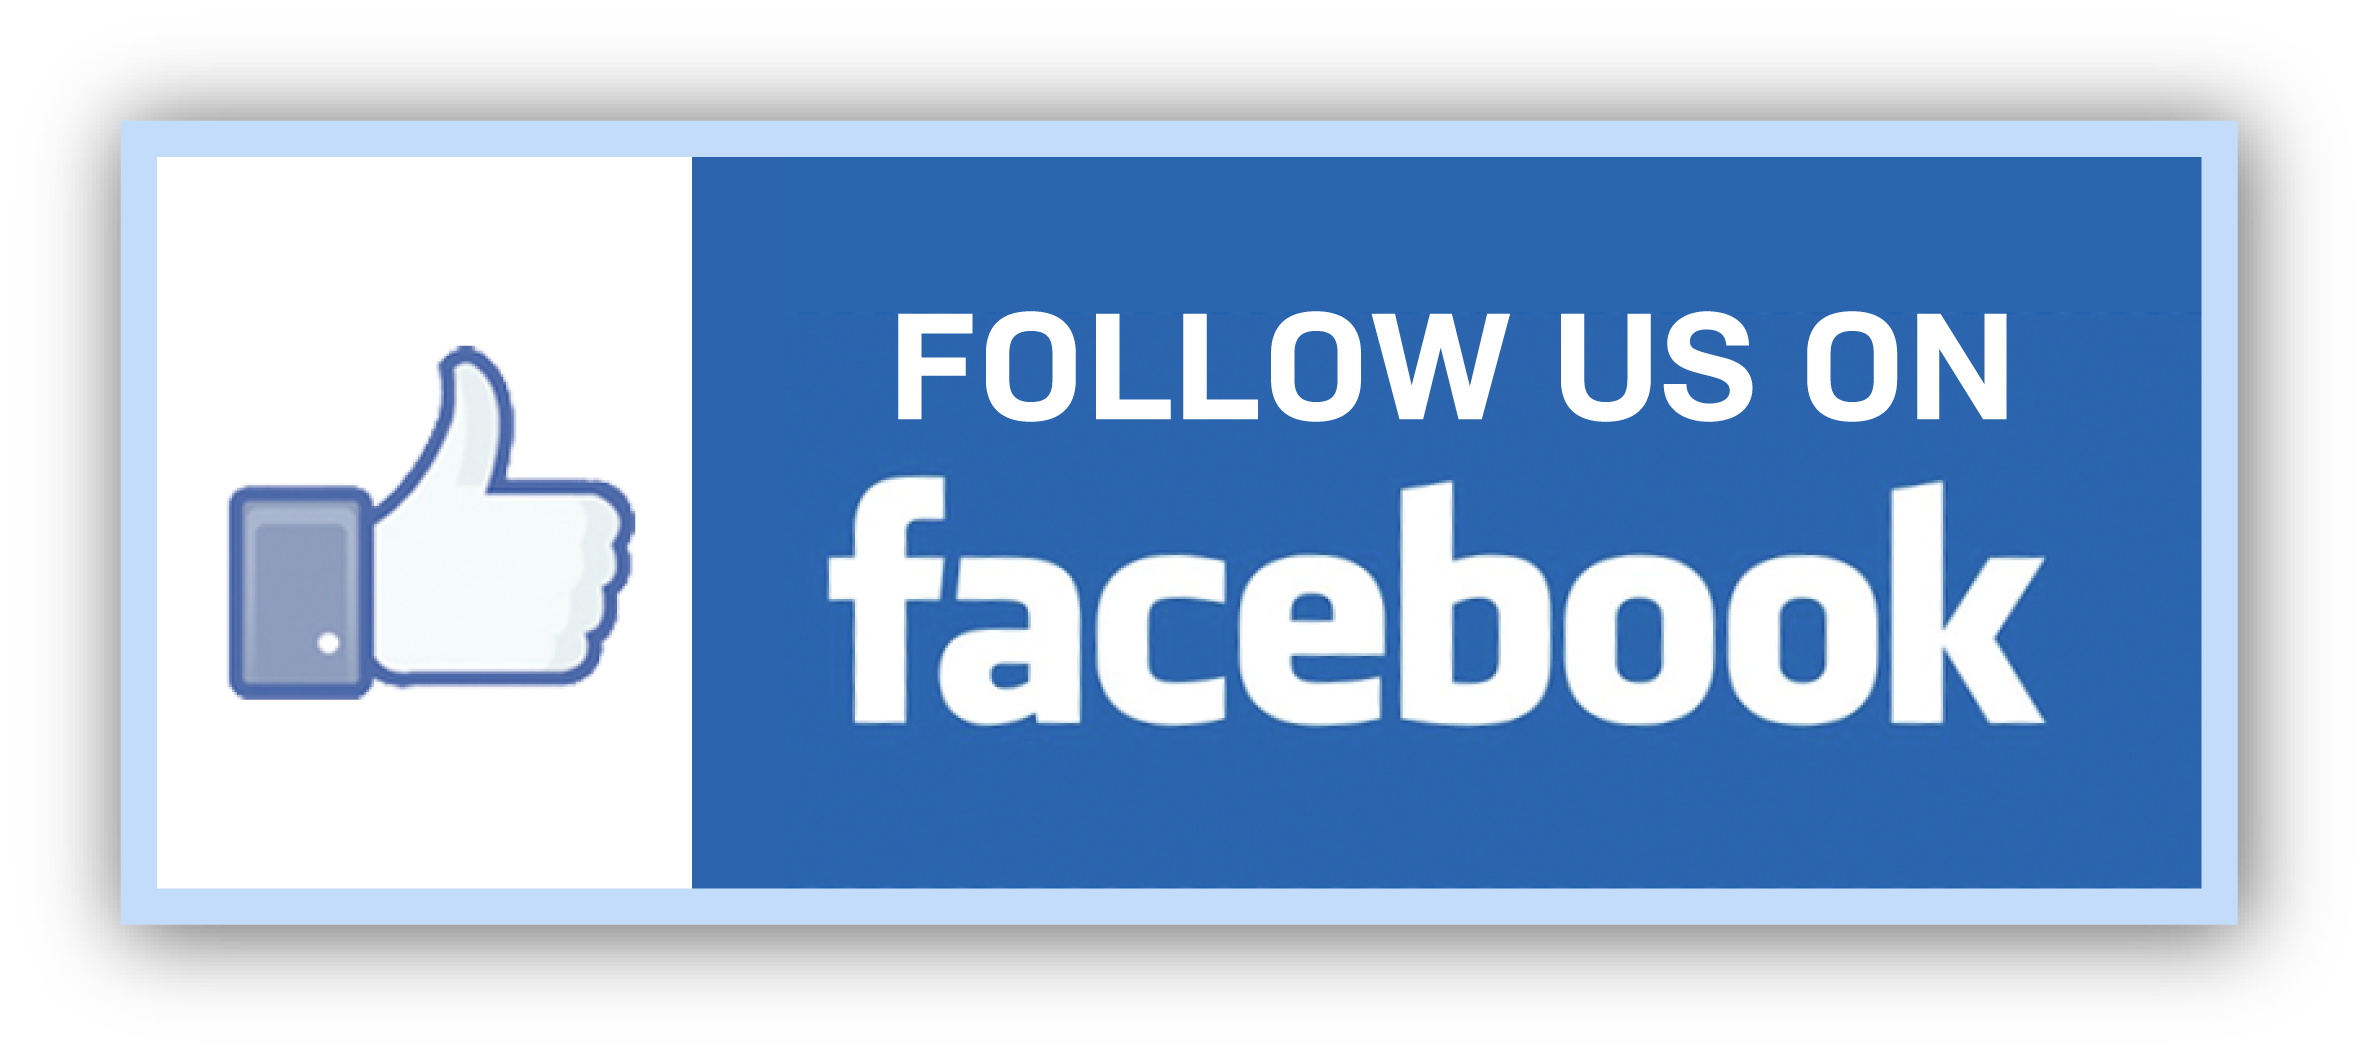 Follow Us On Facebook   What S The Reason To Do This   By Admin